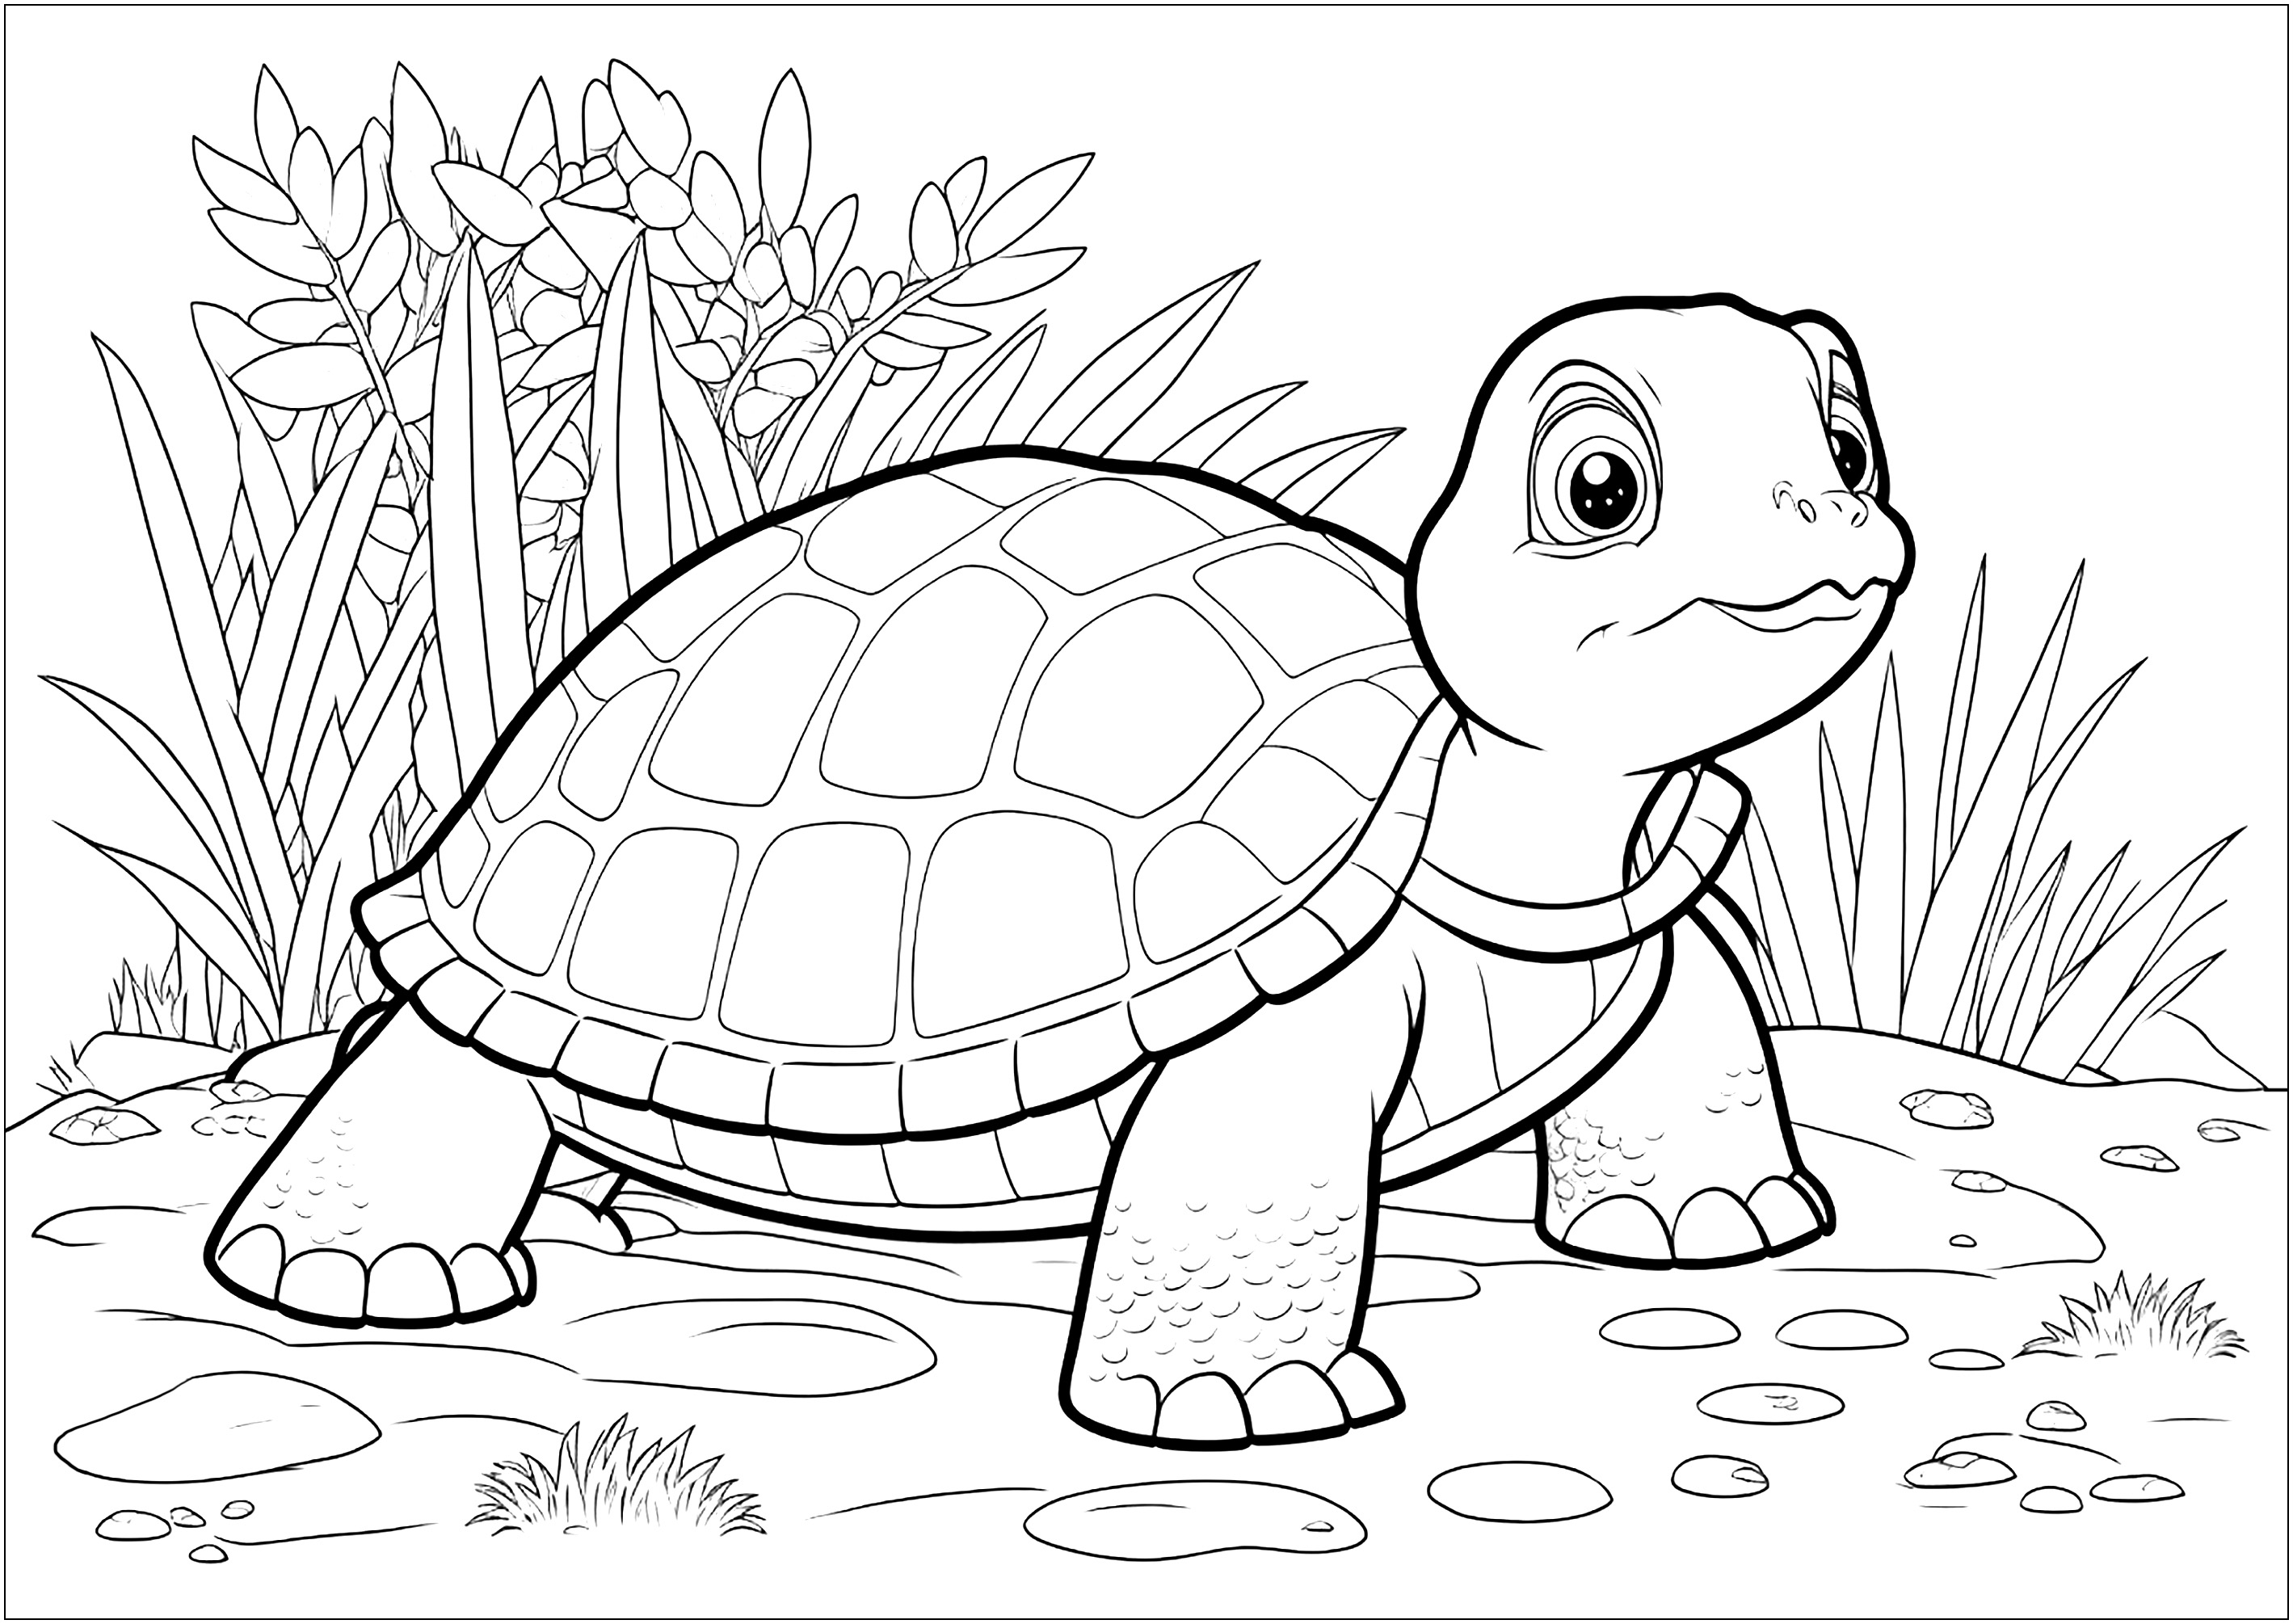 Sea turtle realistic artistic colored drawing Vector Image